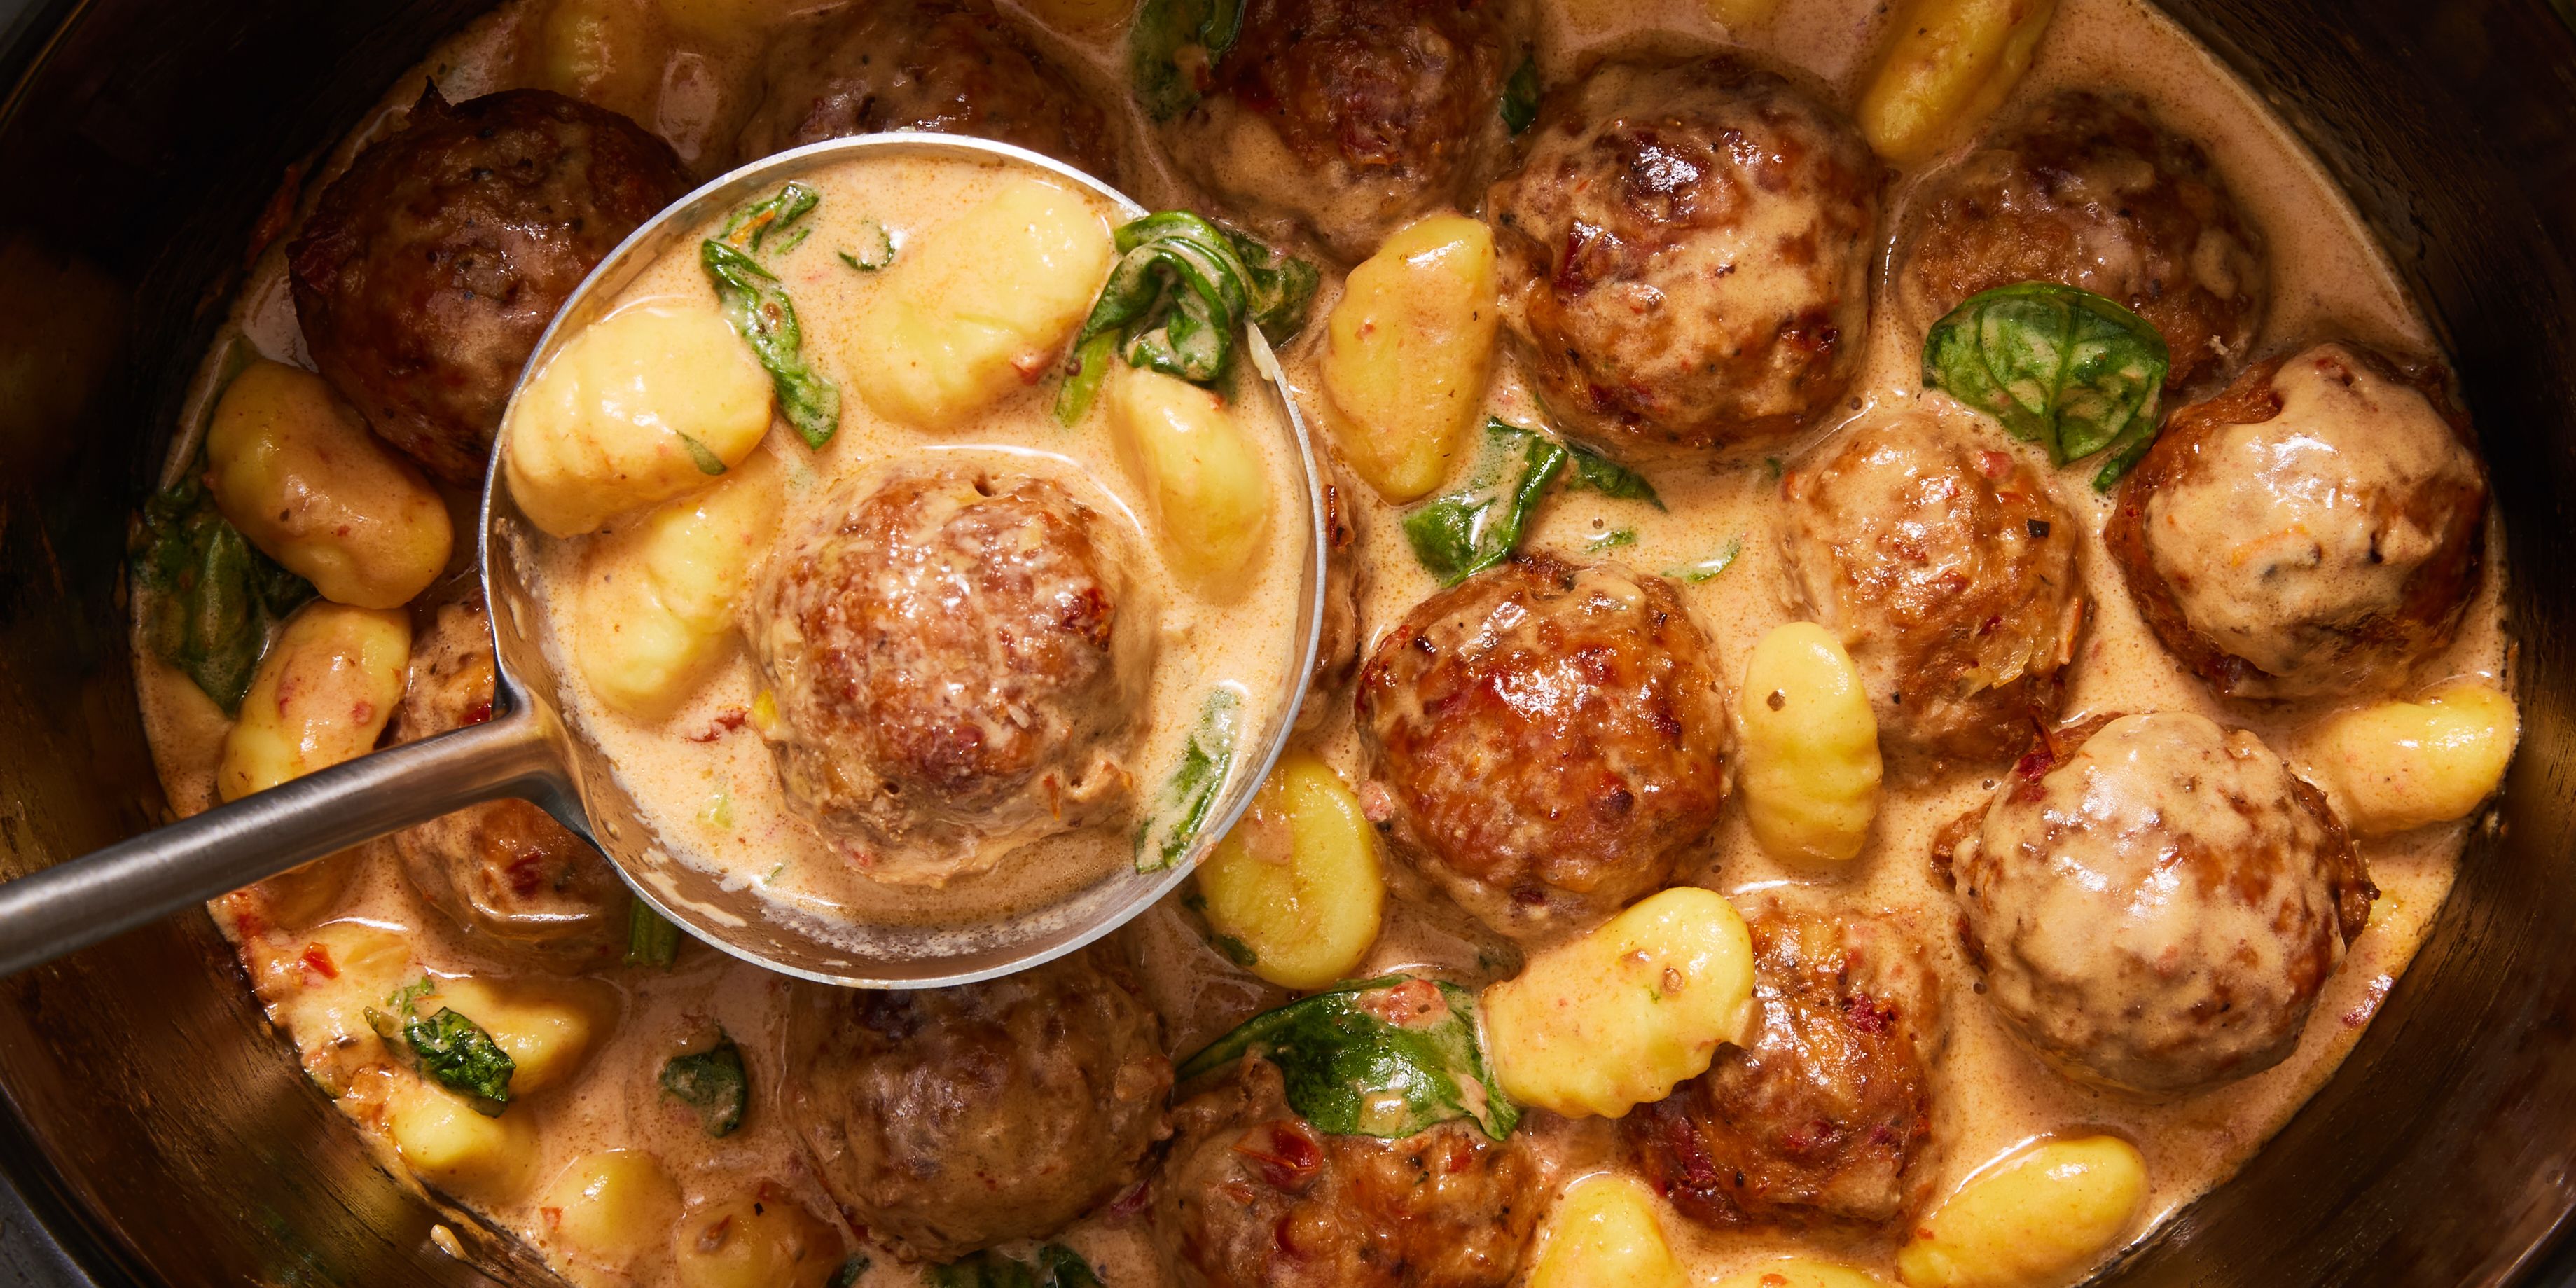 https://hips.hearstapps.com/hmg-prod/images/slow-cooker-tuscan-chicken-meatballs-with-gnocchi-index-64665b26edacd.jpg